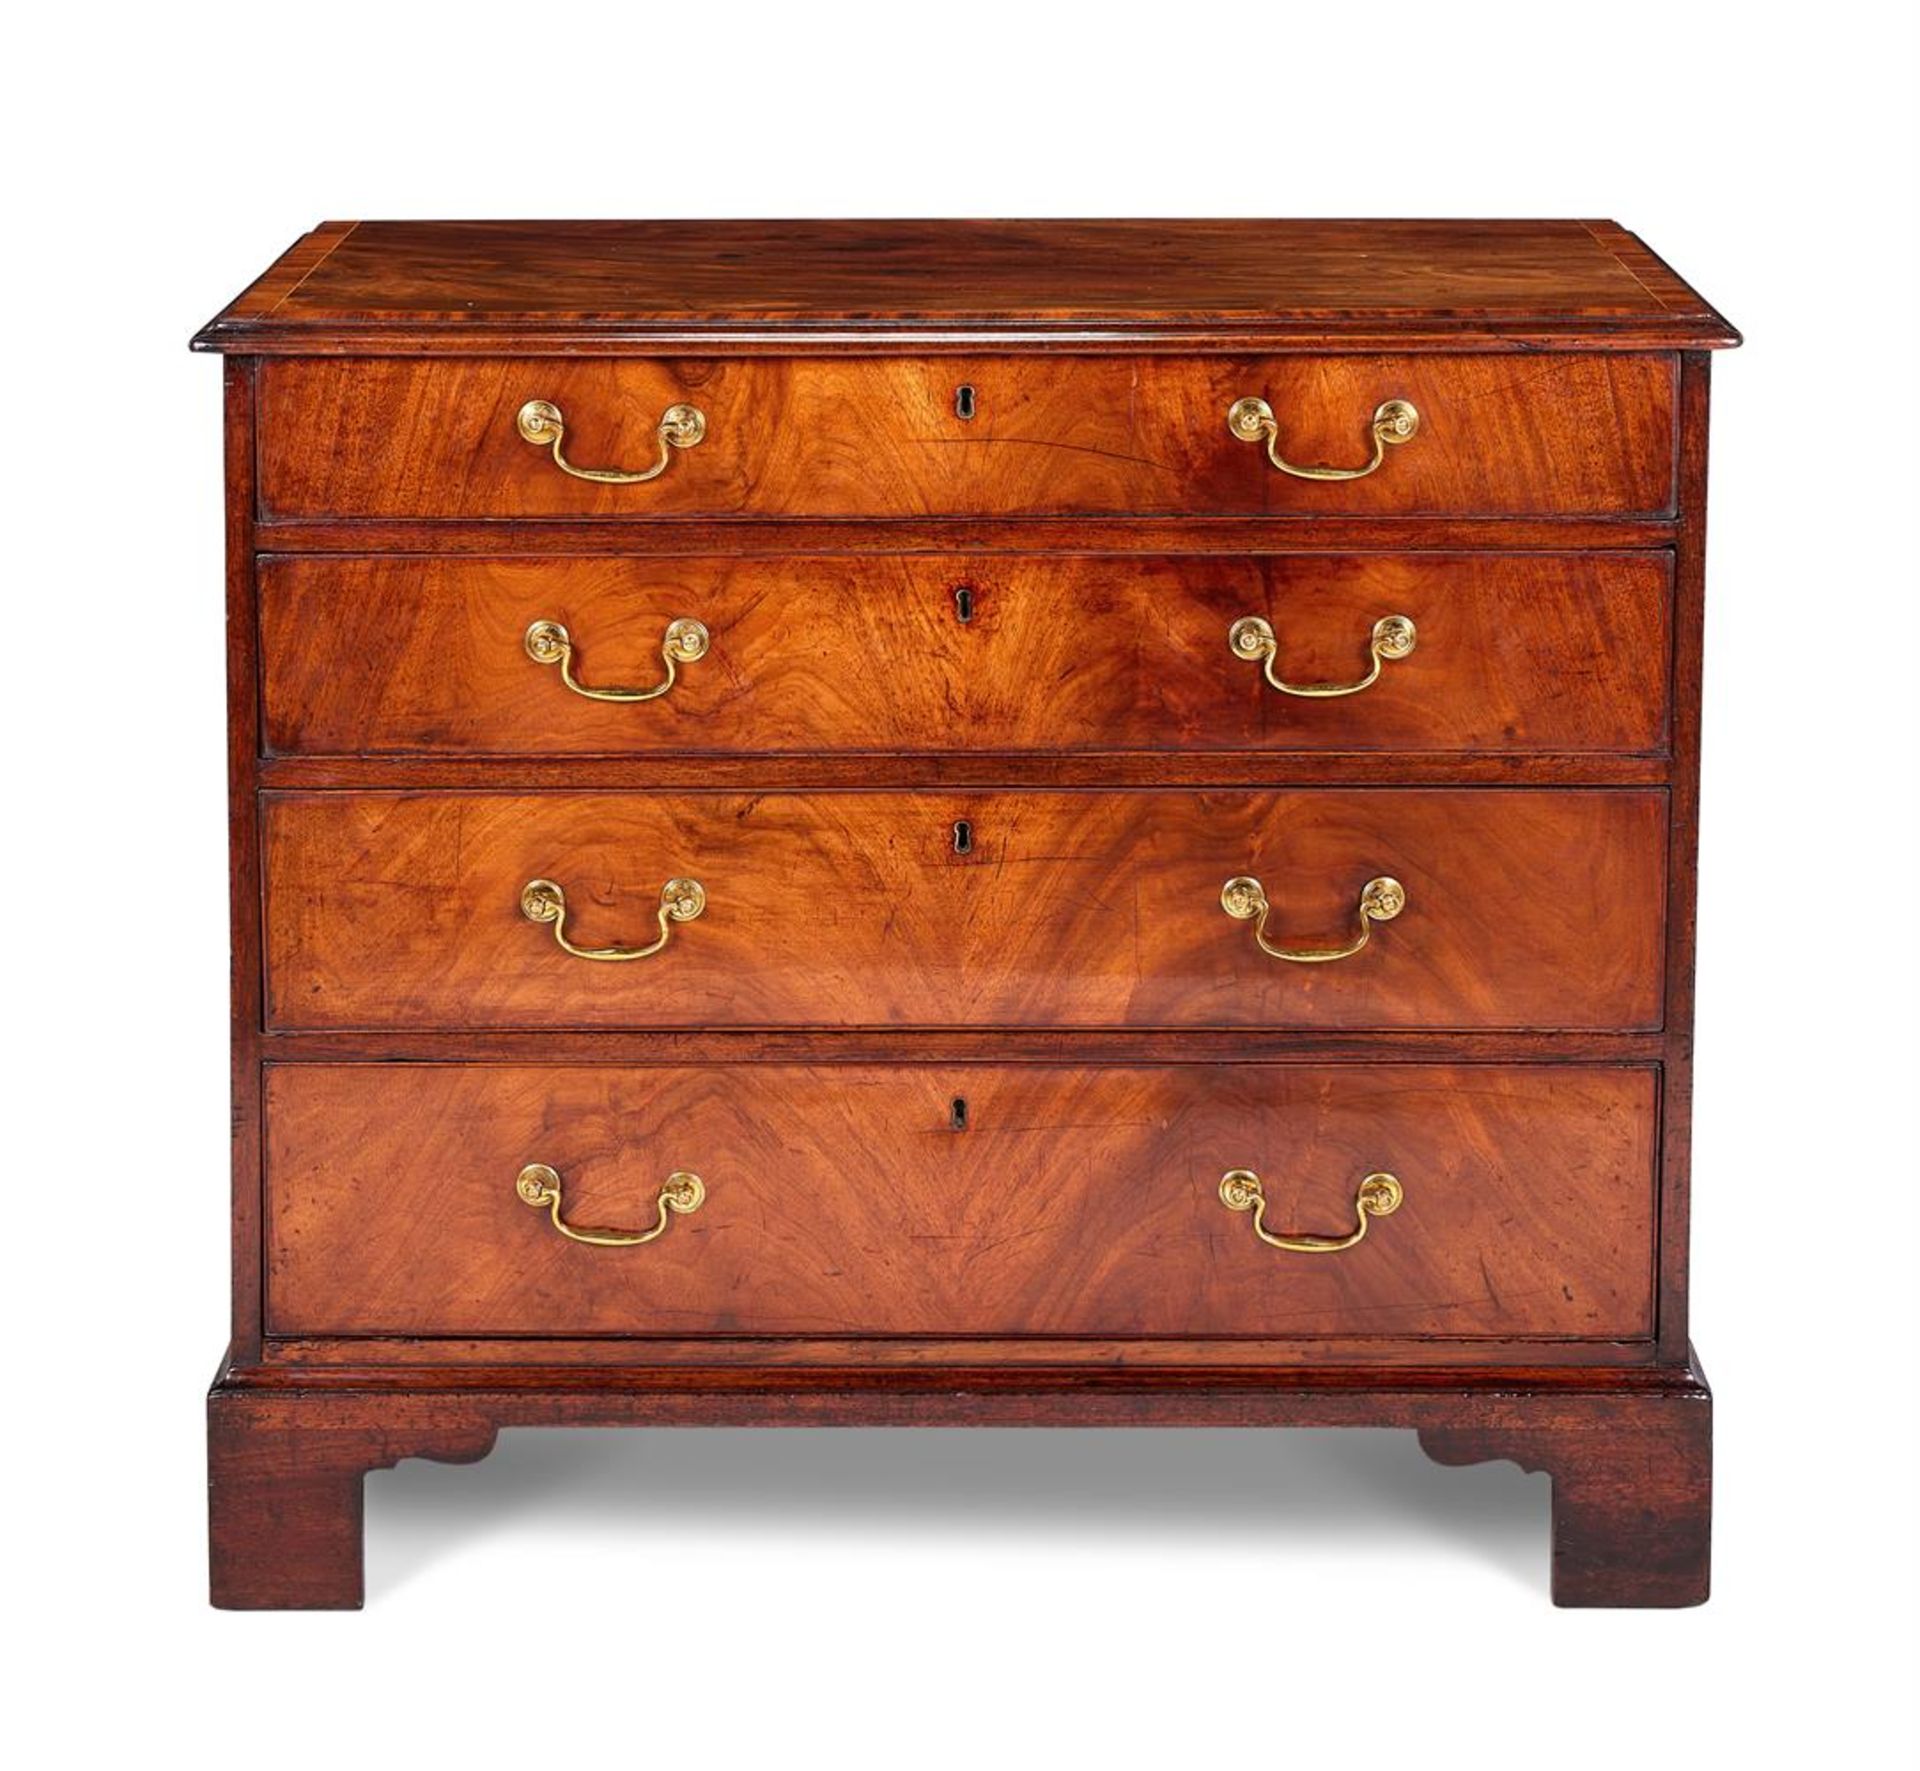 A GEORGE III MAHOGANY AND ELM CHEST SECOND HALF 18TH CENTURY